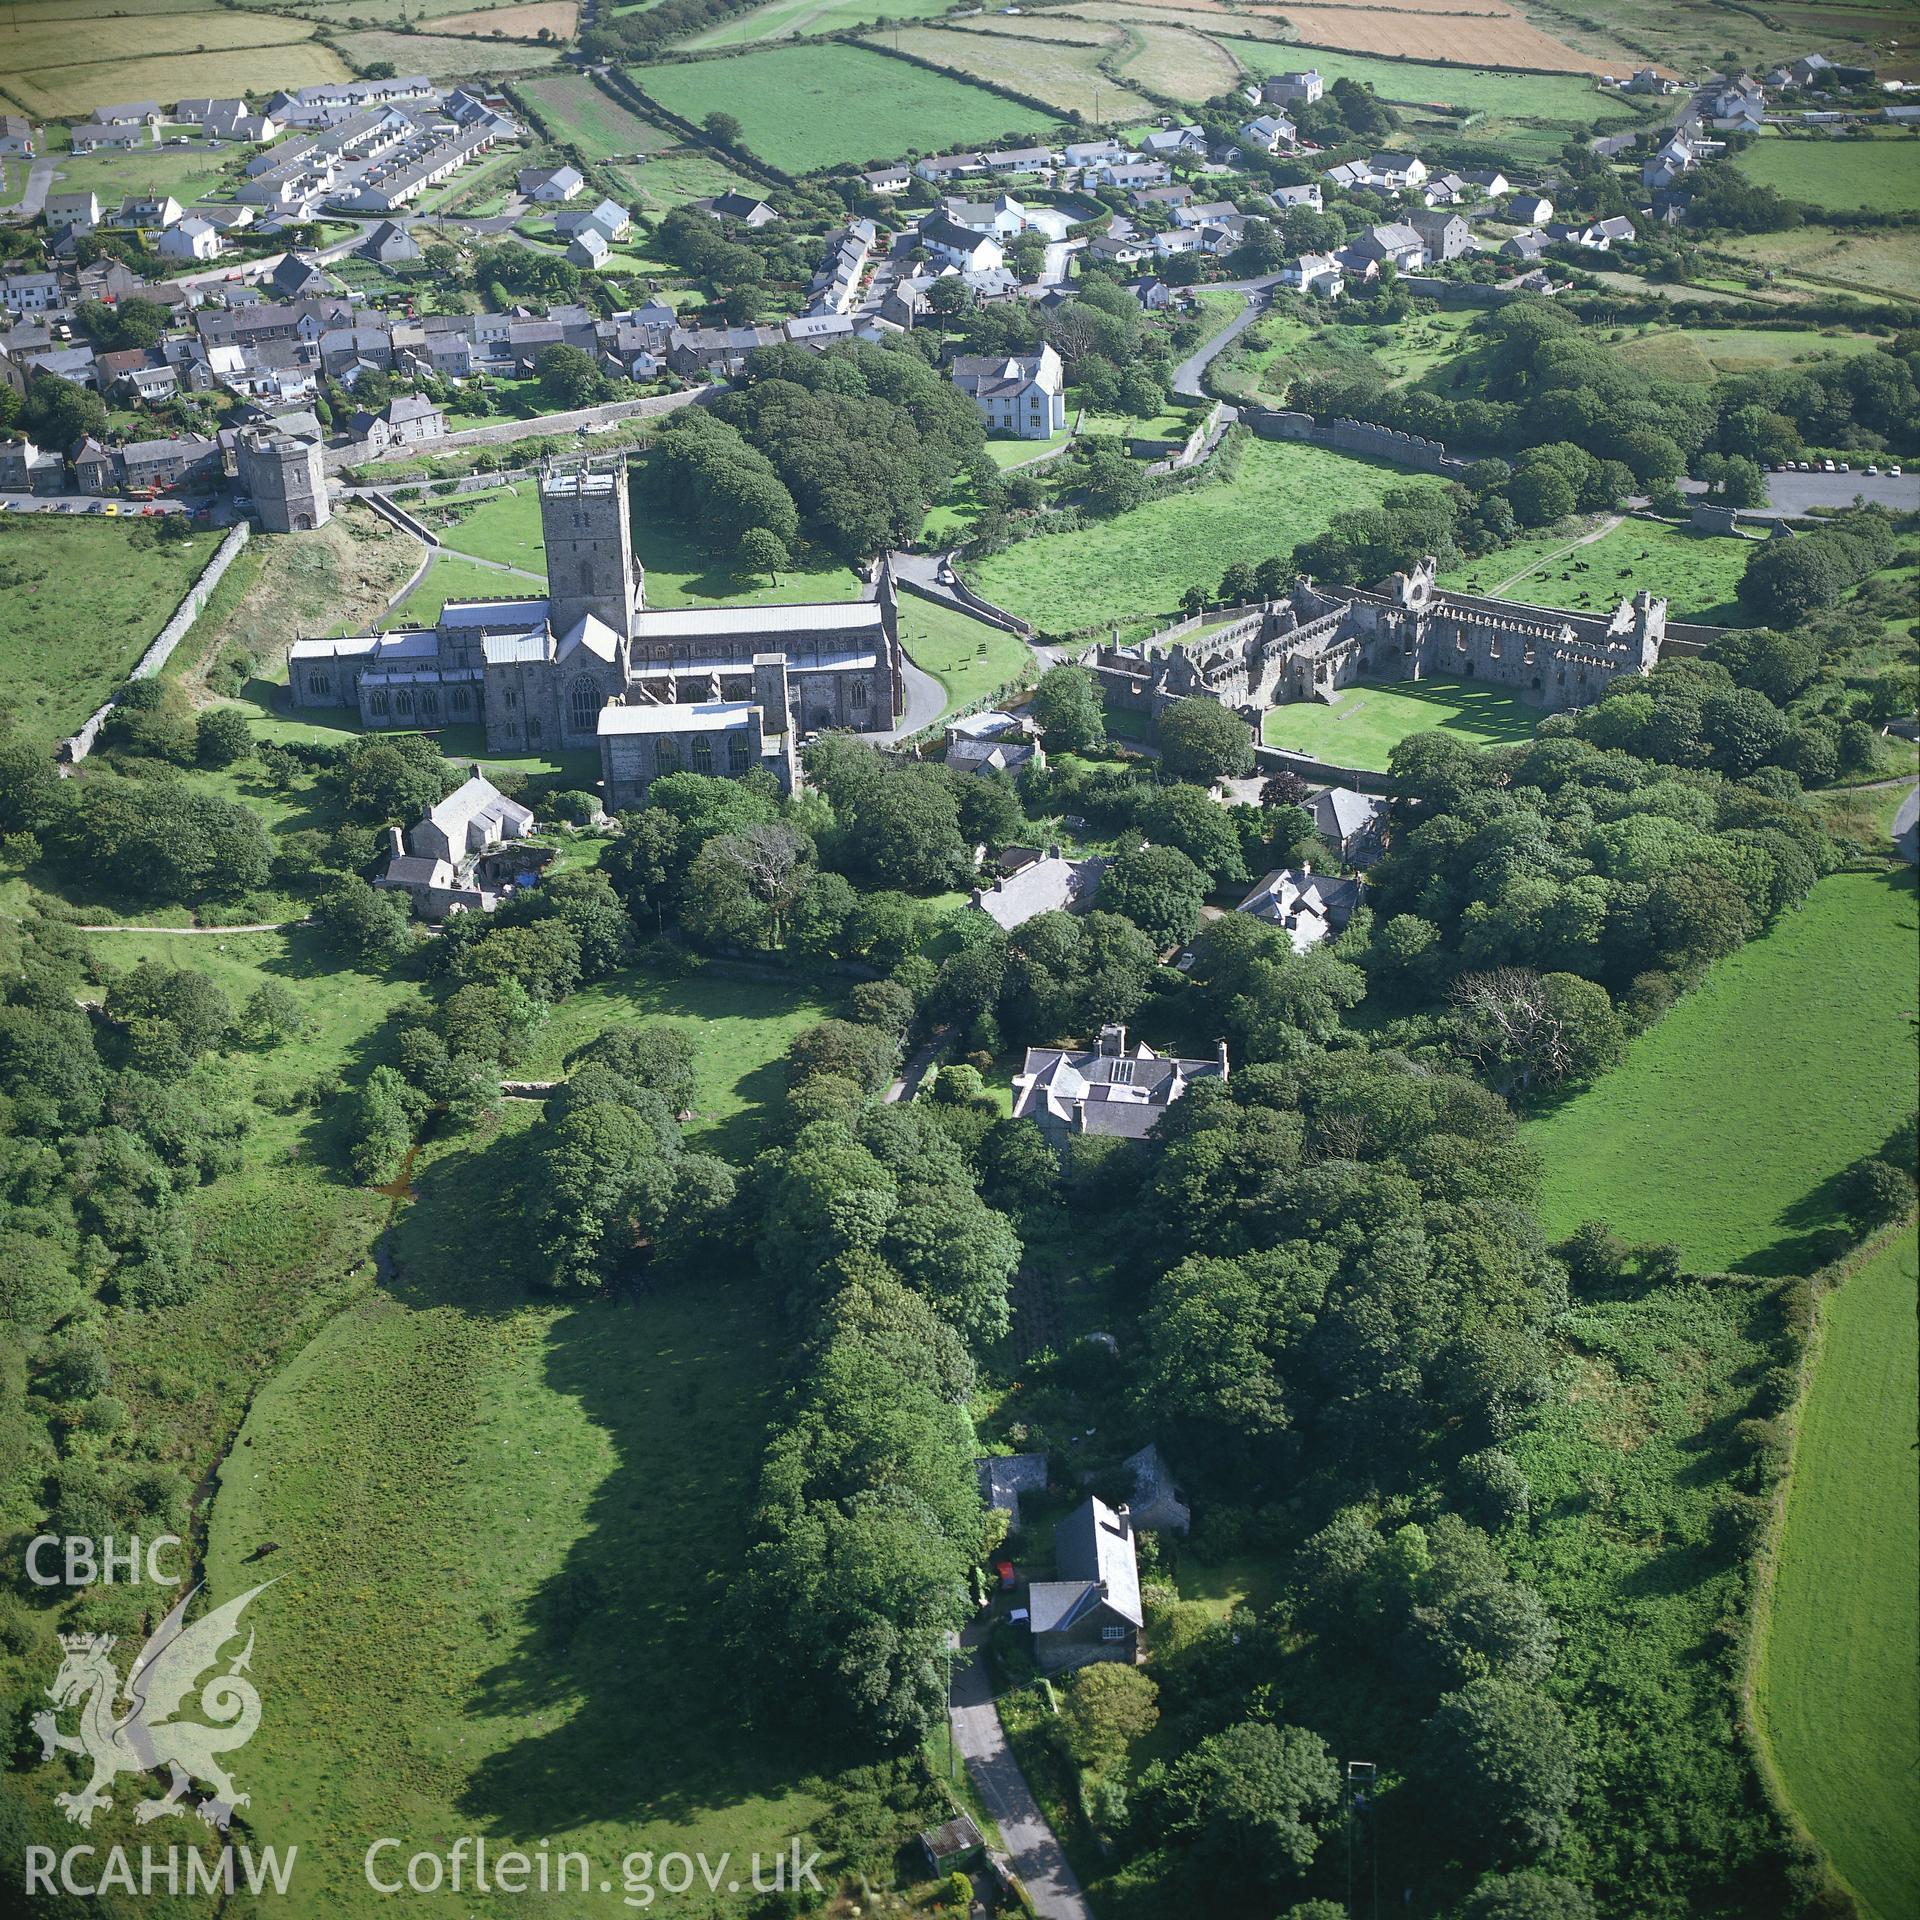 RCAHMW colour oblique aerial photograph of St David's Cathedral, taken by C R Musson, 1990.